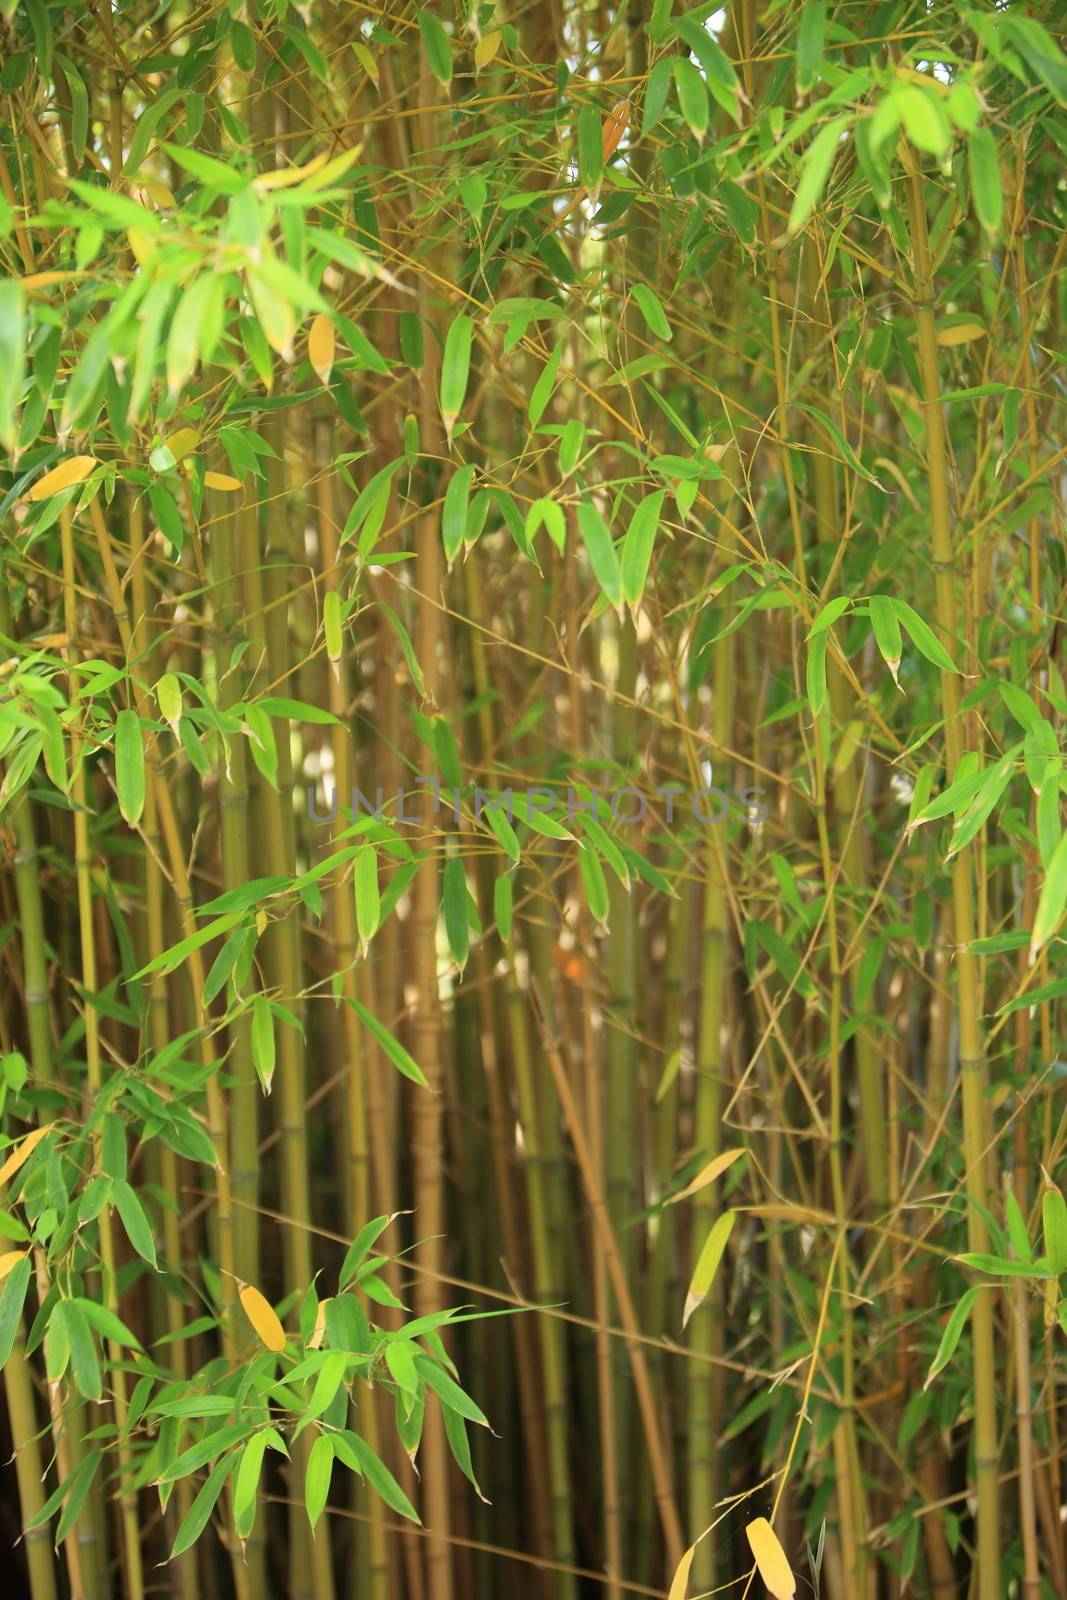 Stand of small ornamental bamboo with fresh green leaves growing in a garden, background image